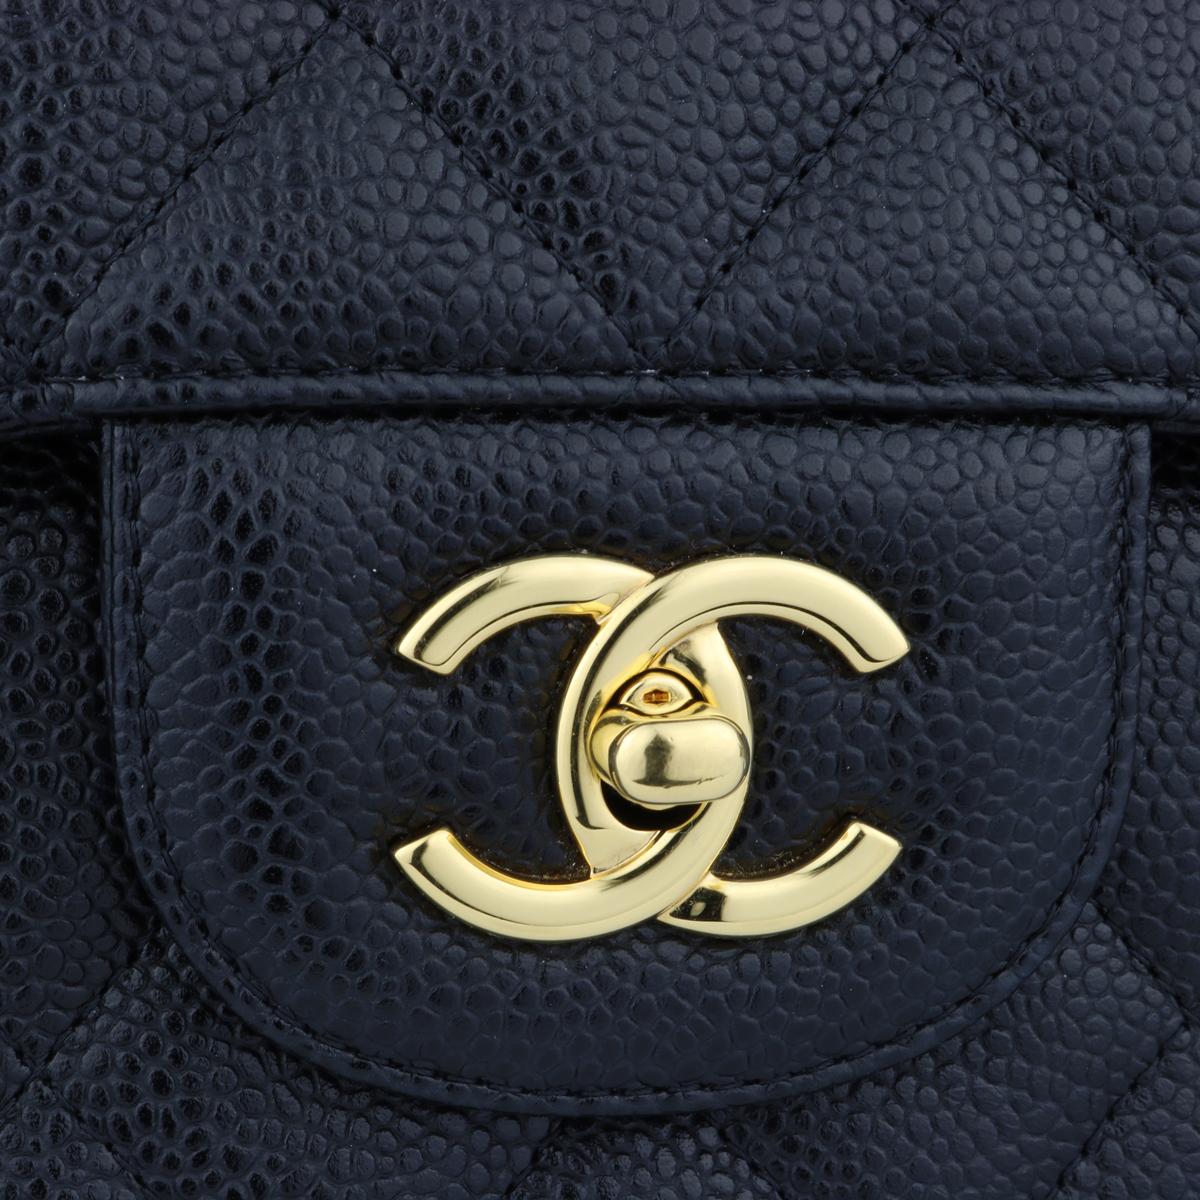 Women's or Men's CHANEL Double Flap Jumbo Bag Black Caviar with Gold Hardware 2015